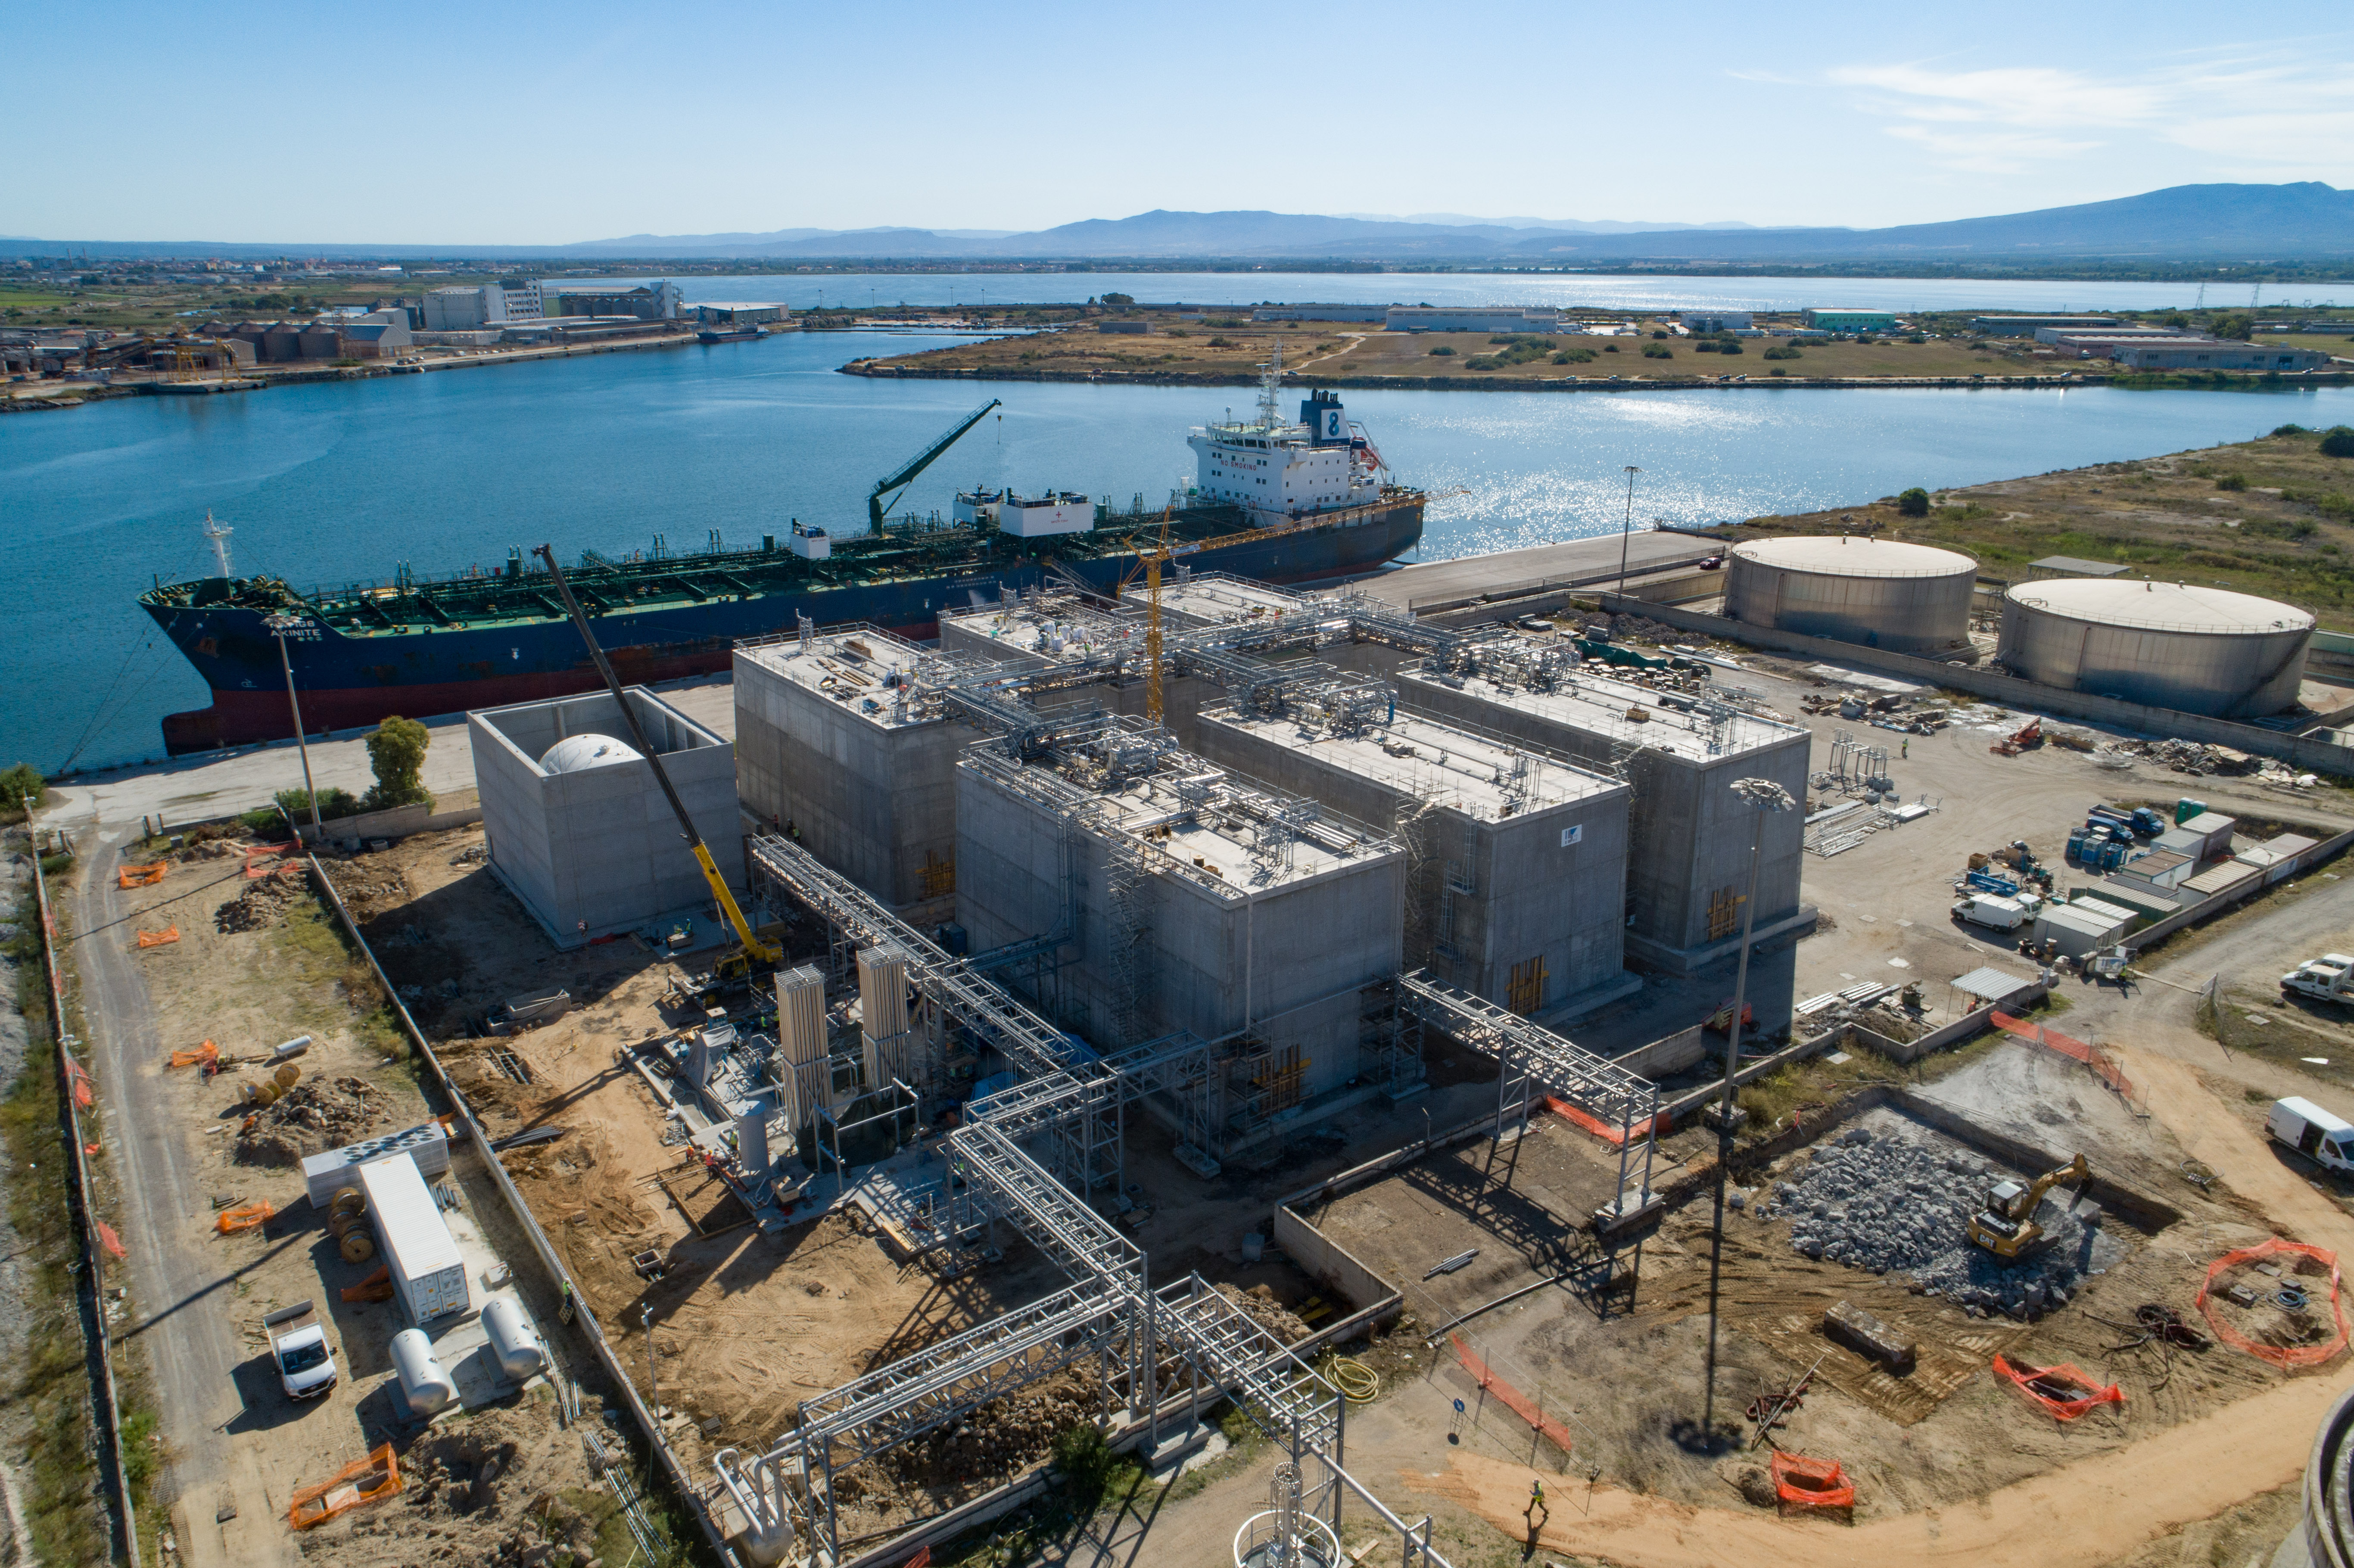 Reganosa to operate the first LNG terminal in Sardinia